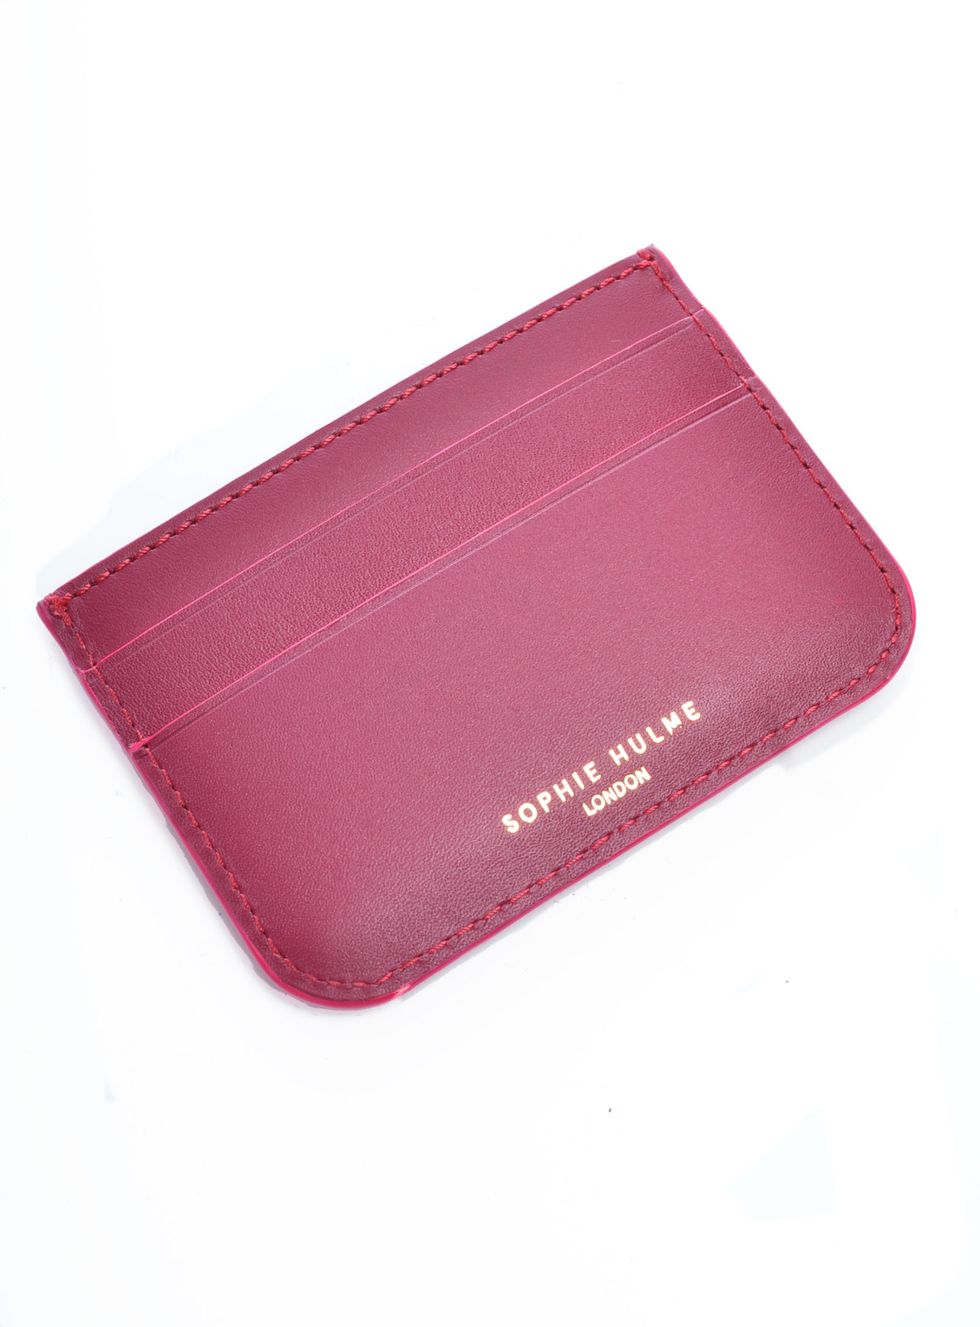 Textile, Red, Magenta, Maroon, Leather, Wallet, 